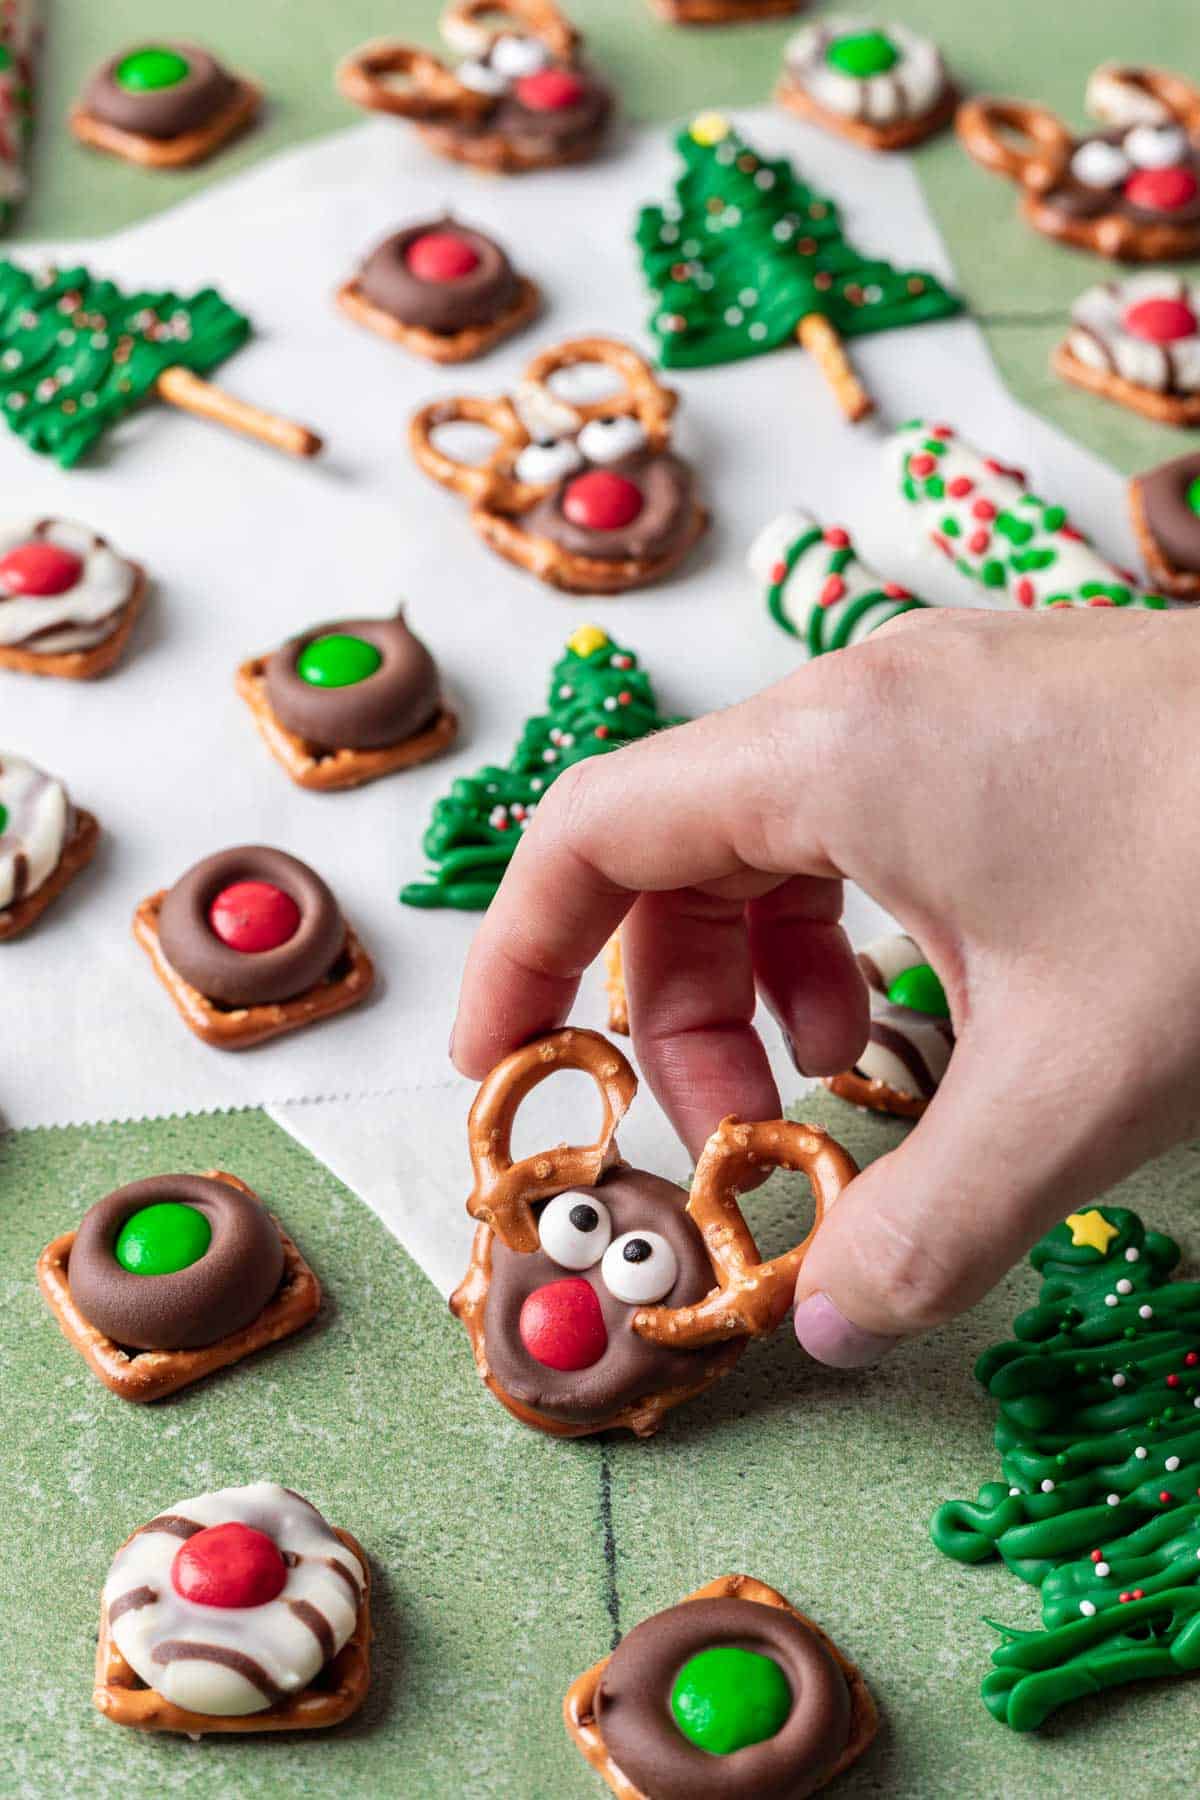 A hand picking up a reindeer pretzel to snack on.